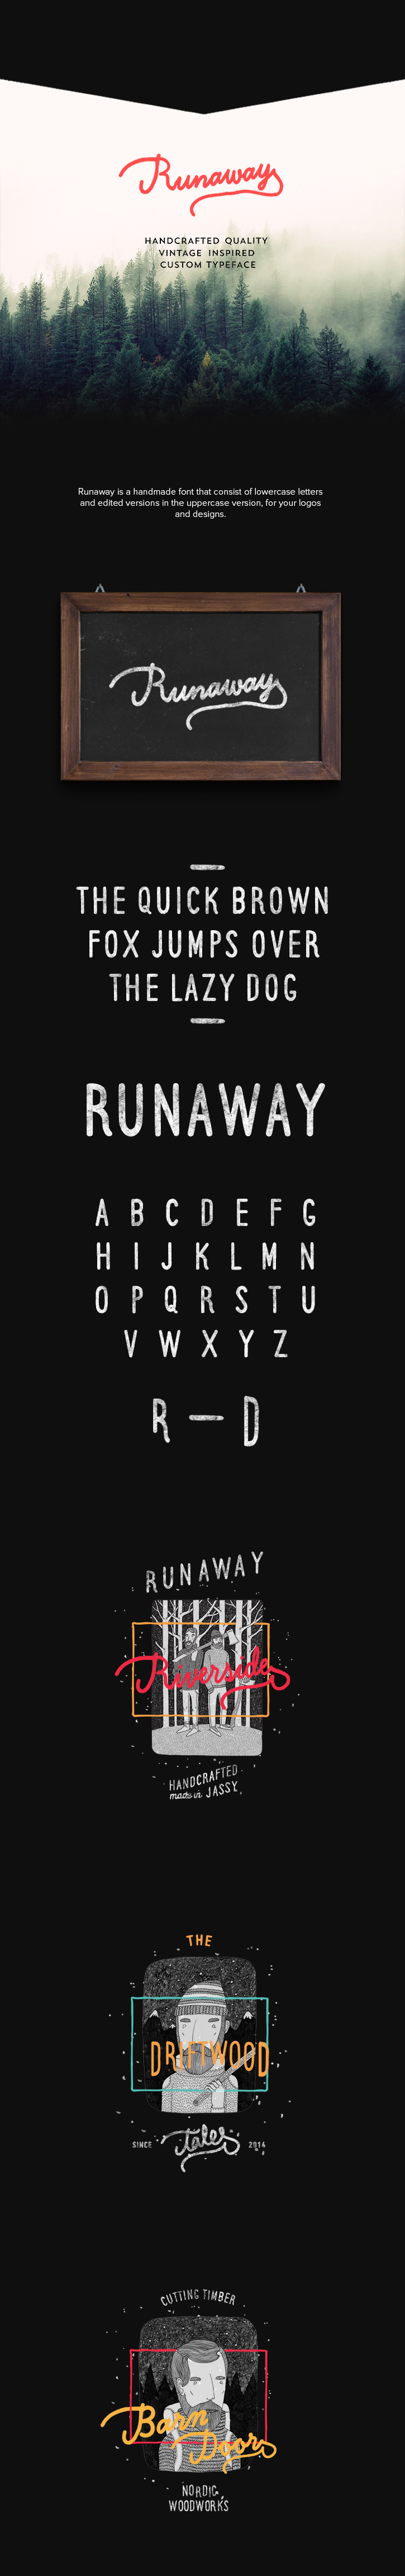 font handmade hand drawn lettering type Runaway Typeface vintage Retro free HAND LETTERING Free font